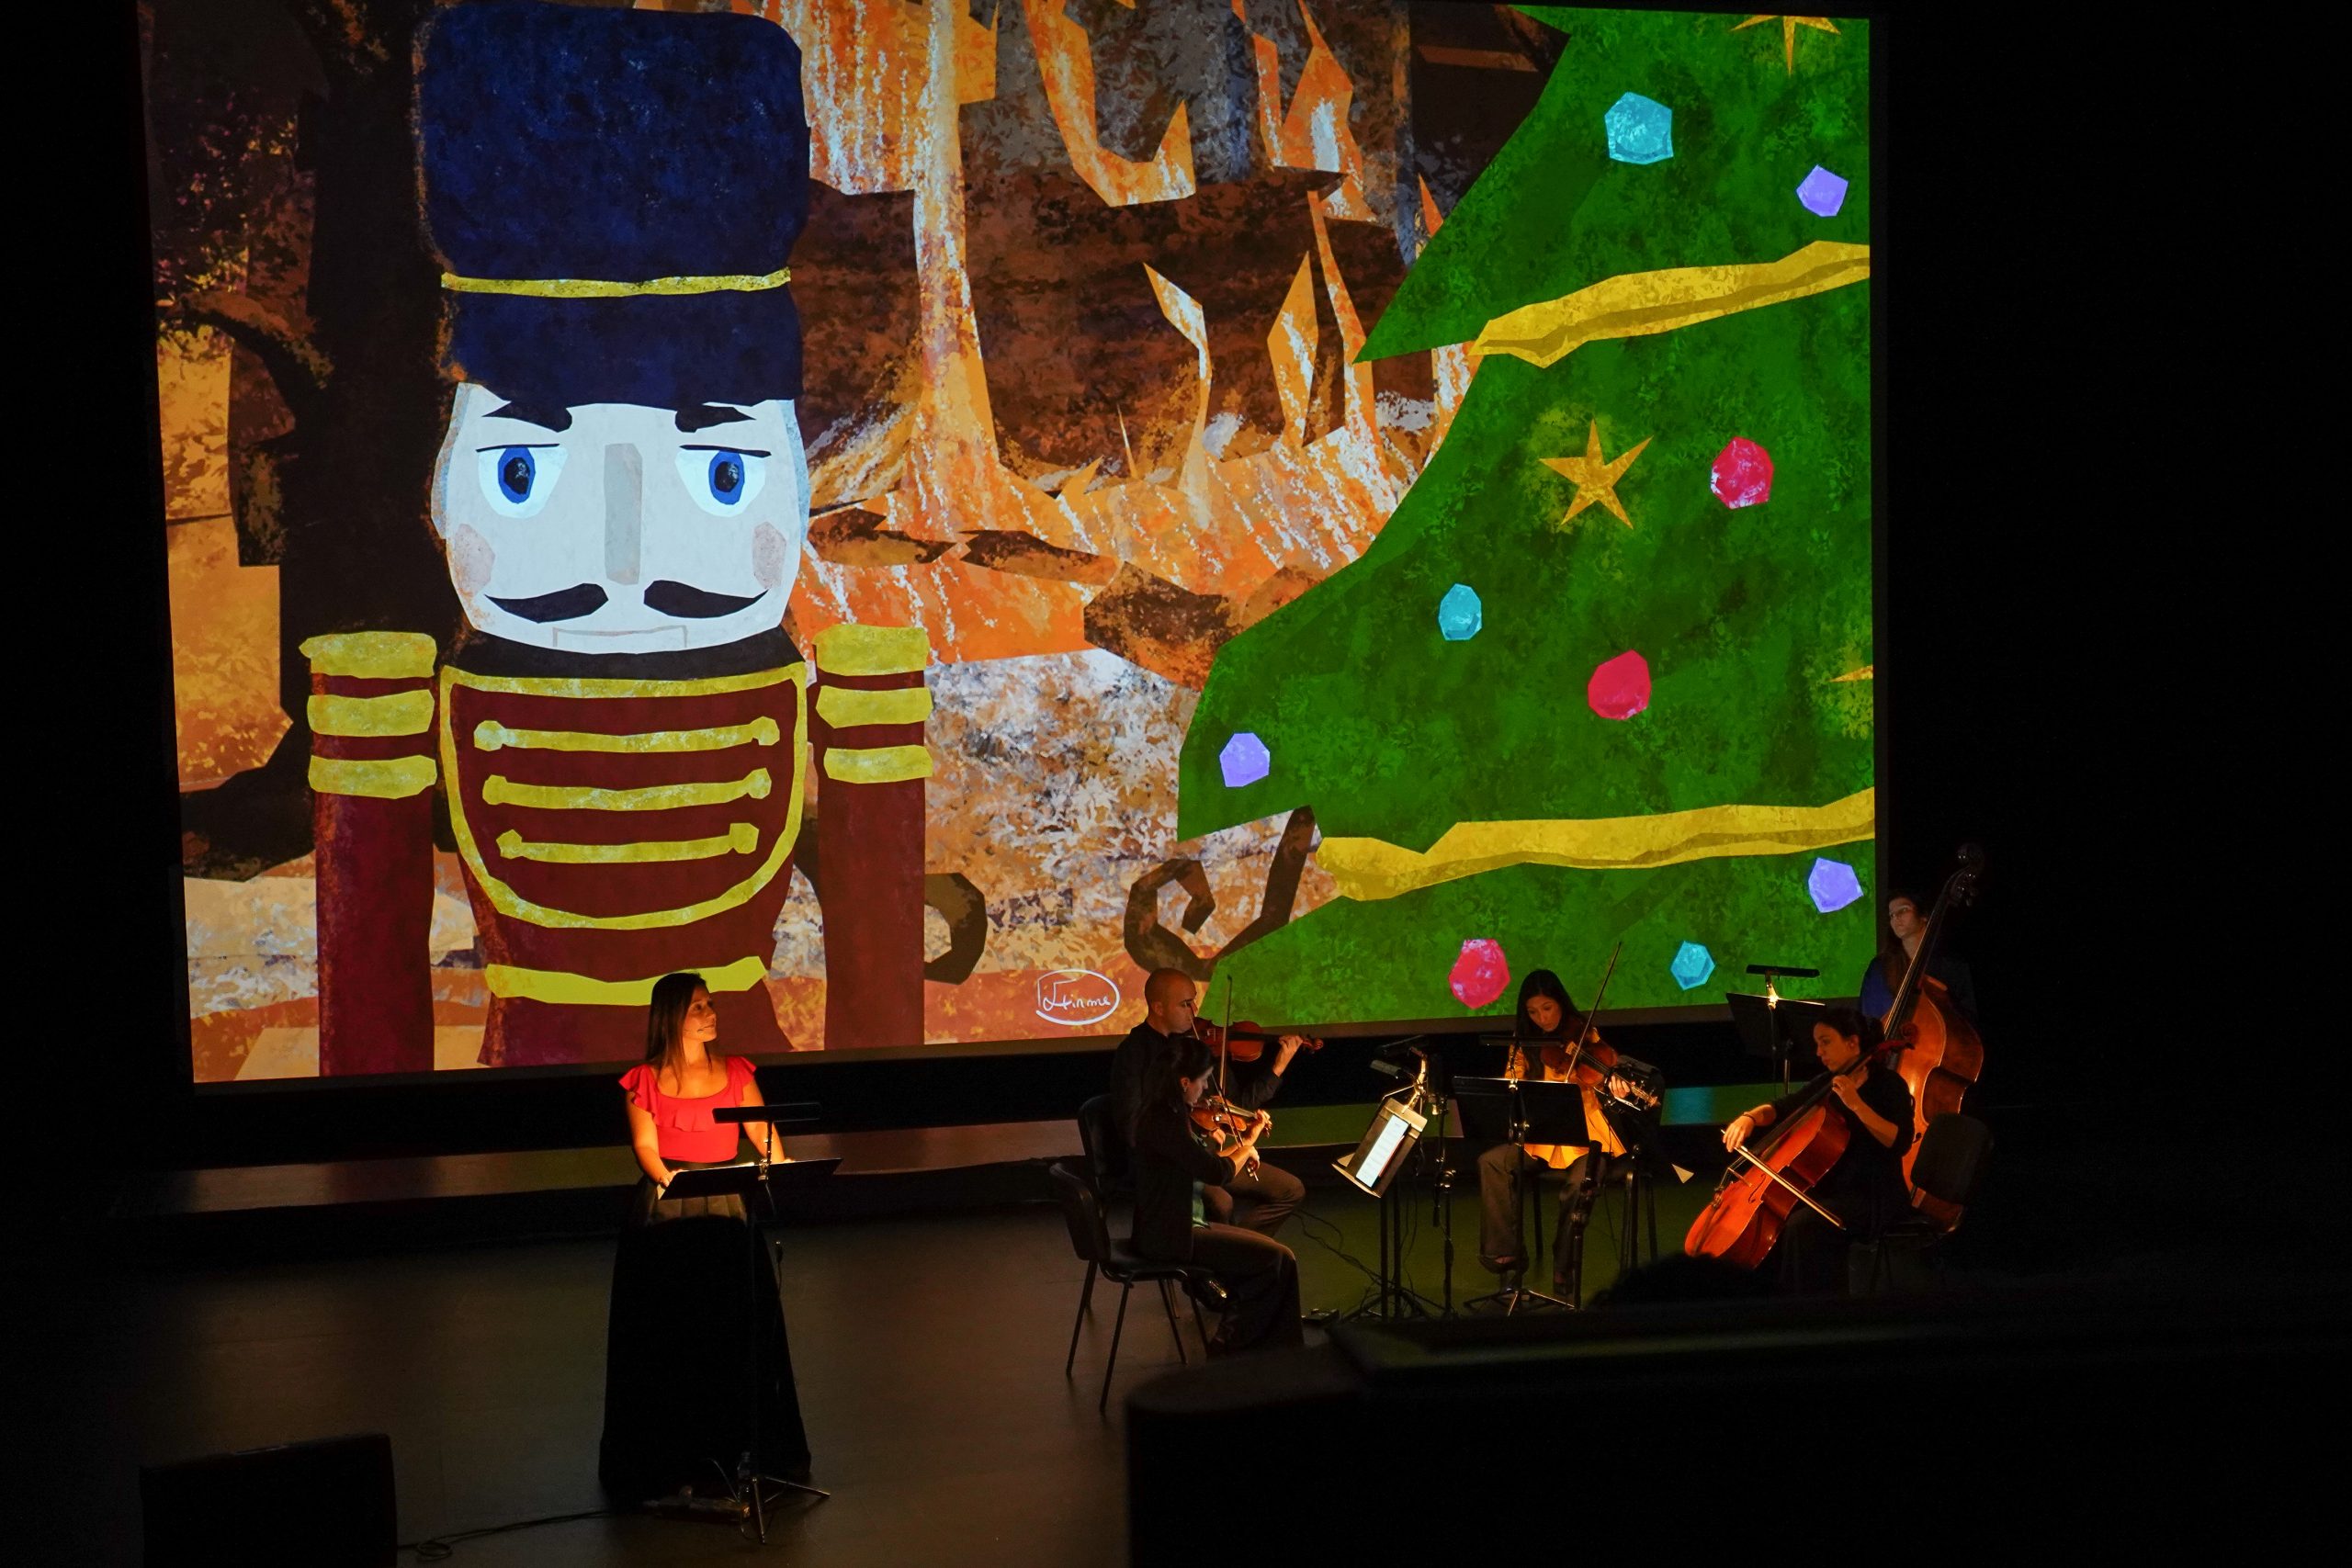  Photography. On stage, musicians are seated and a woman is standing. In the background, the image of a little soldier and a tree with Christmas ornaments.